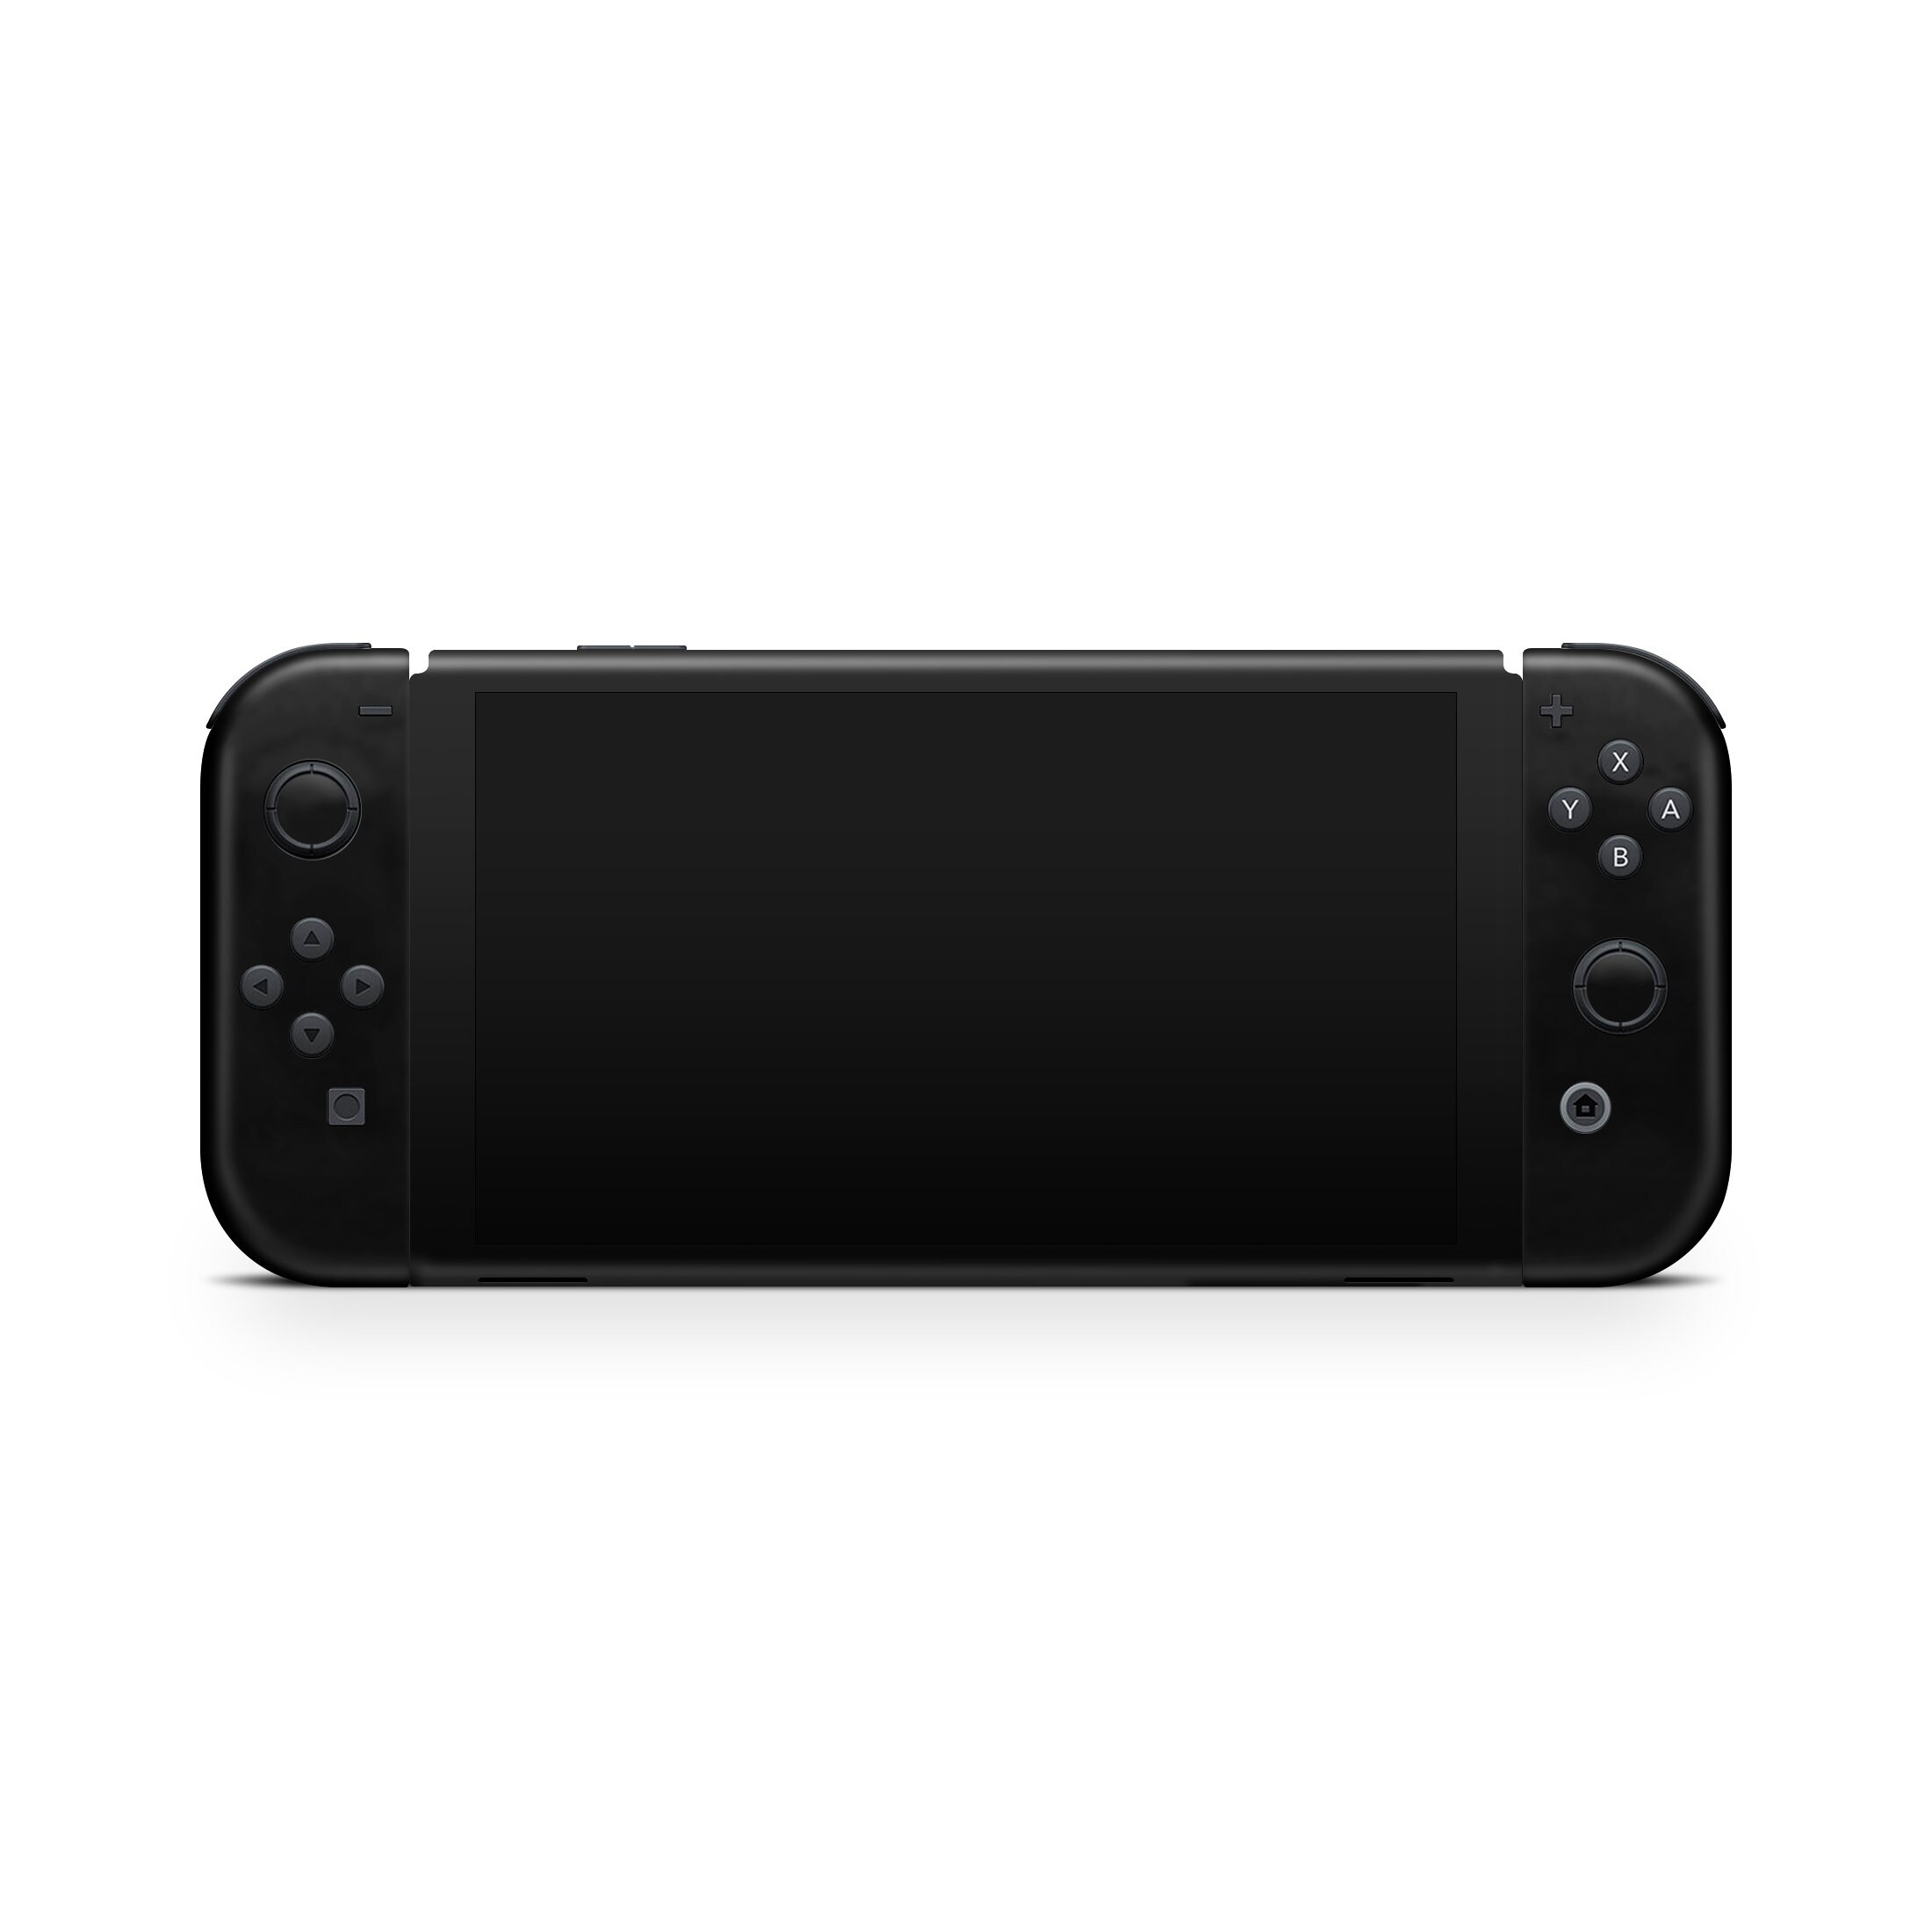 NEW) Nintendo Switch OLED ($289.99 in App Only Sale Price - Black